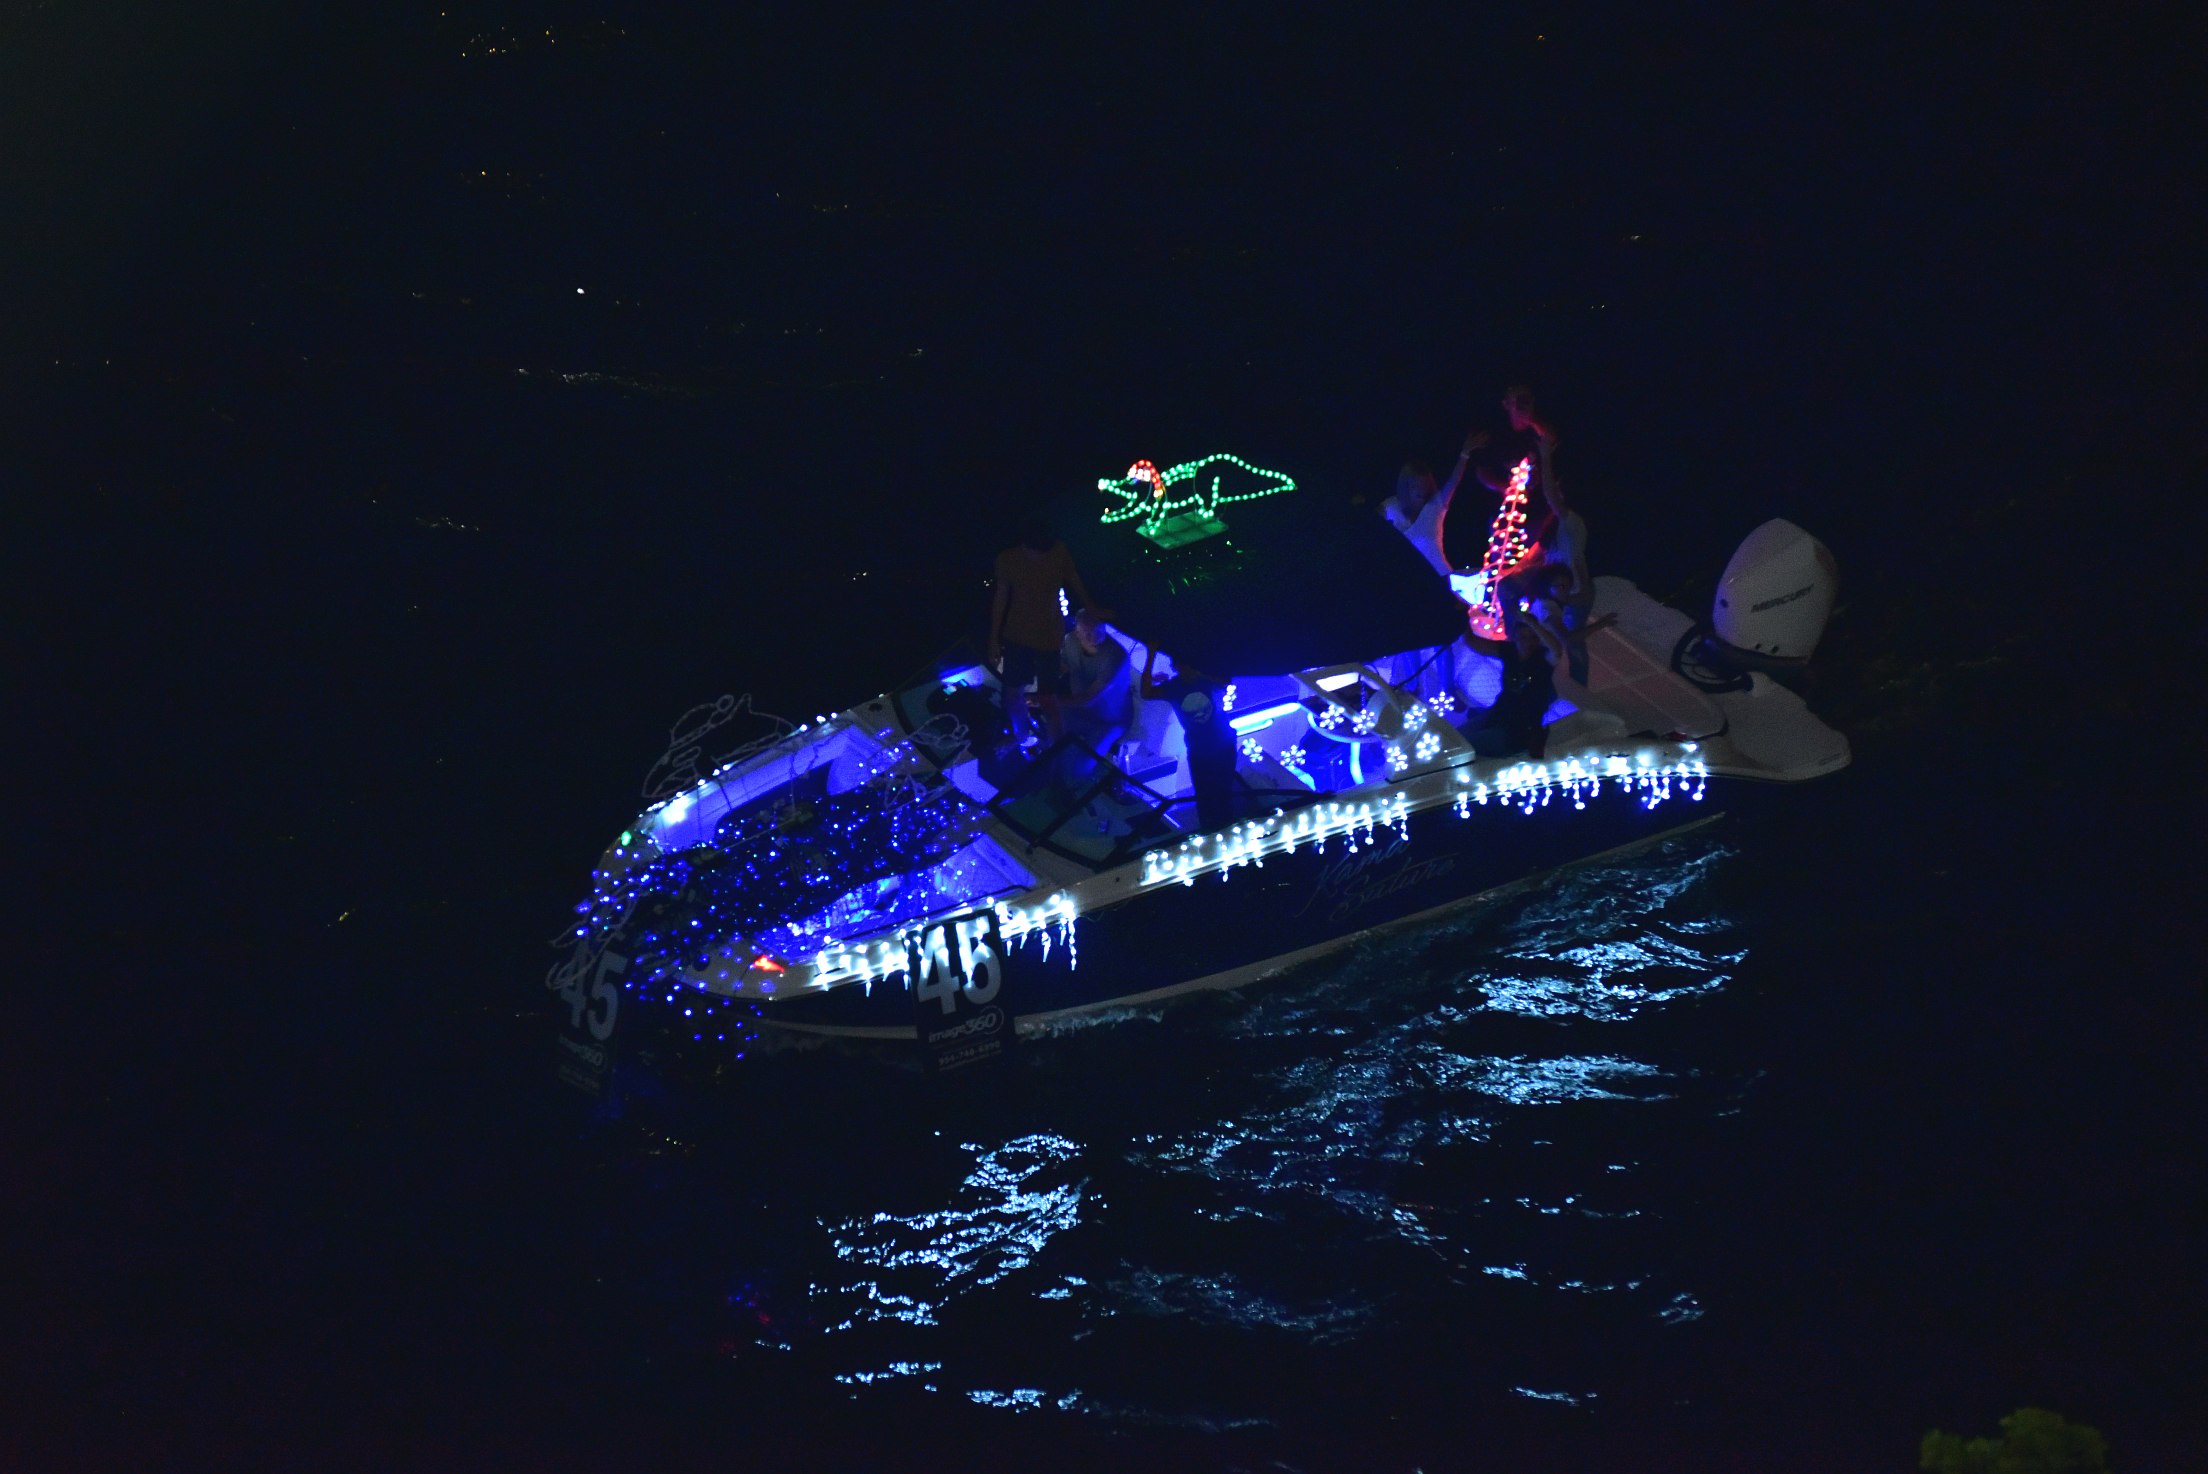 Kama Suture, boat number 45 in the 2021 Winterfest Boat Parade